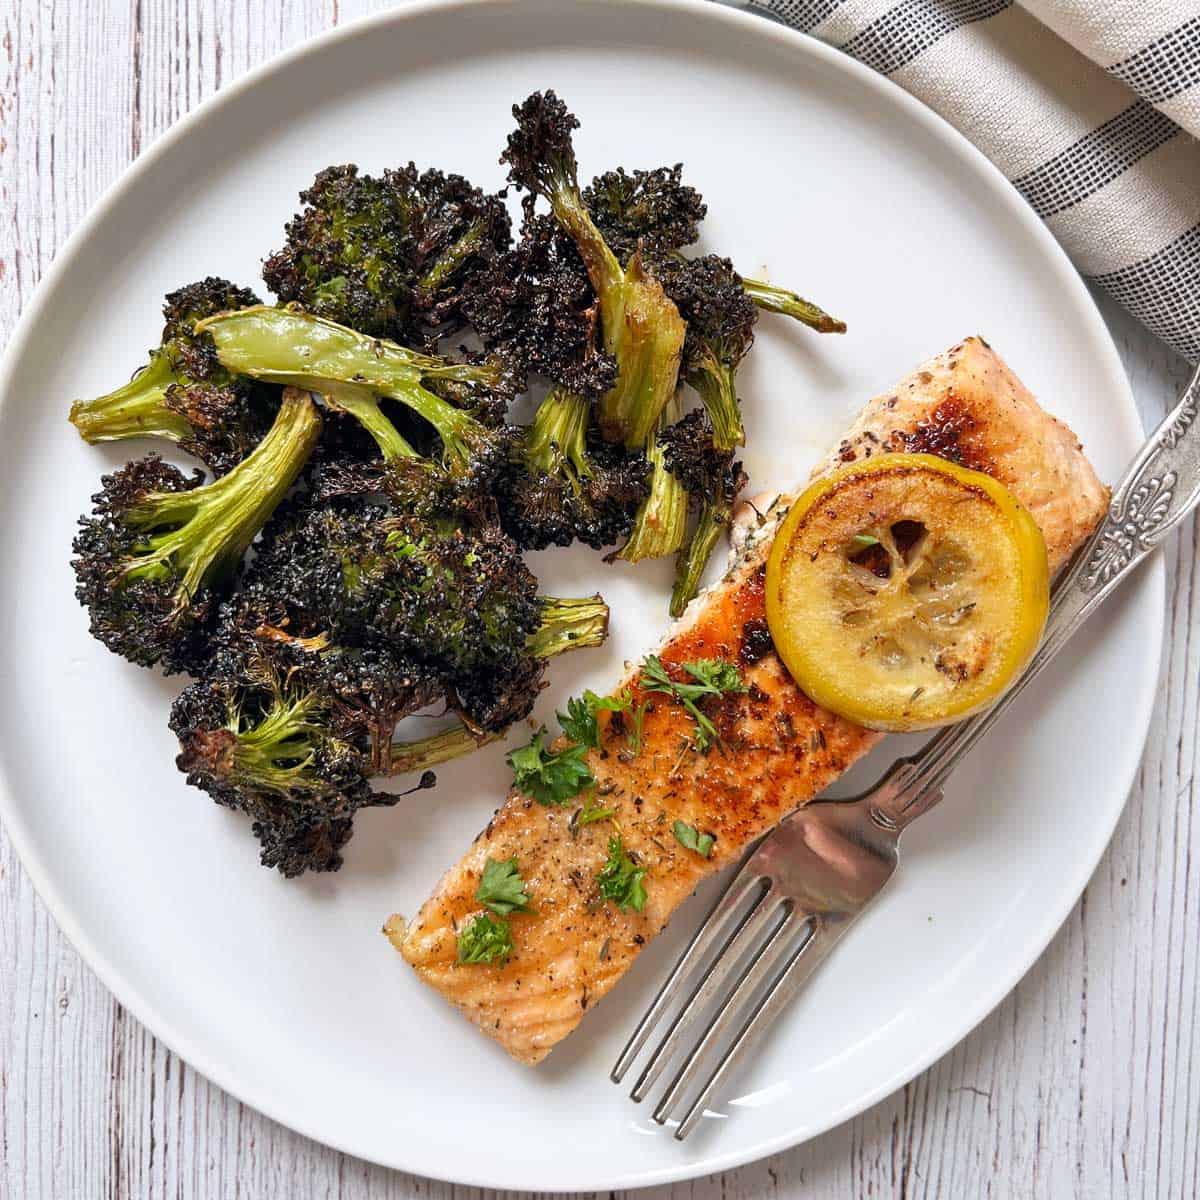 Pan-seared salmon is served with roasted broccoli.